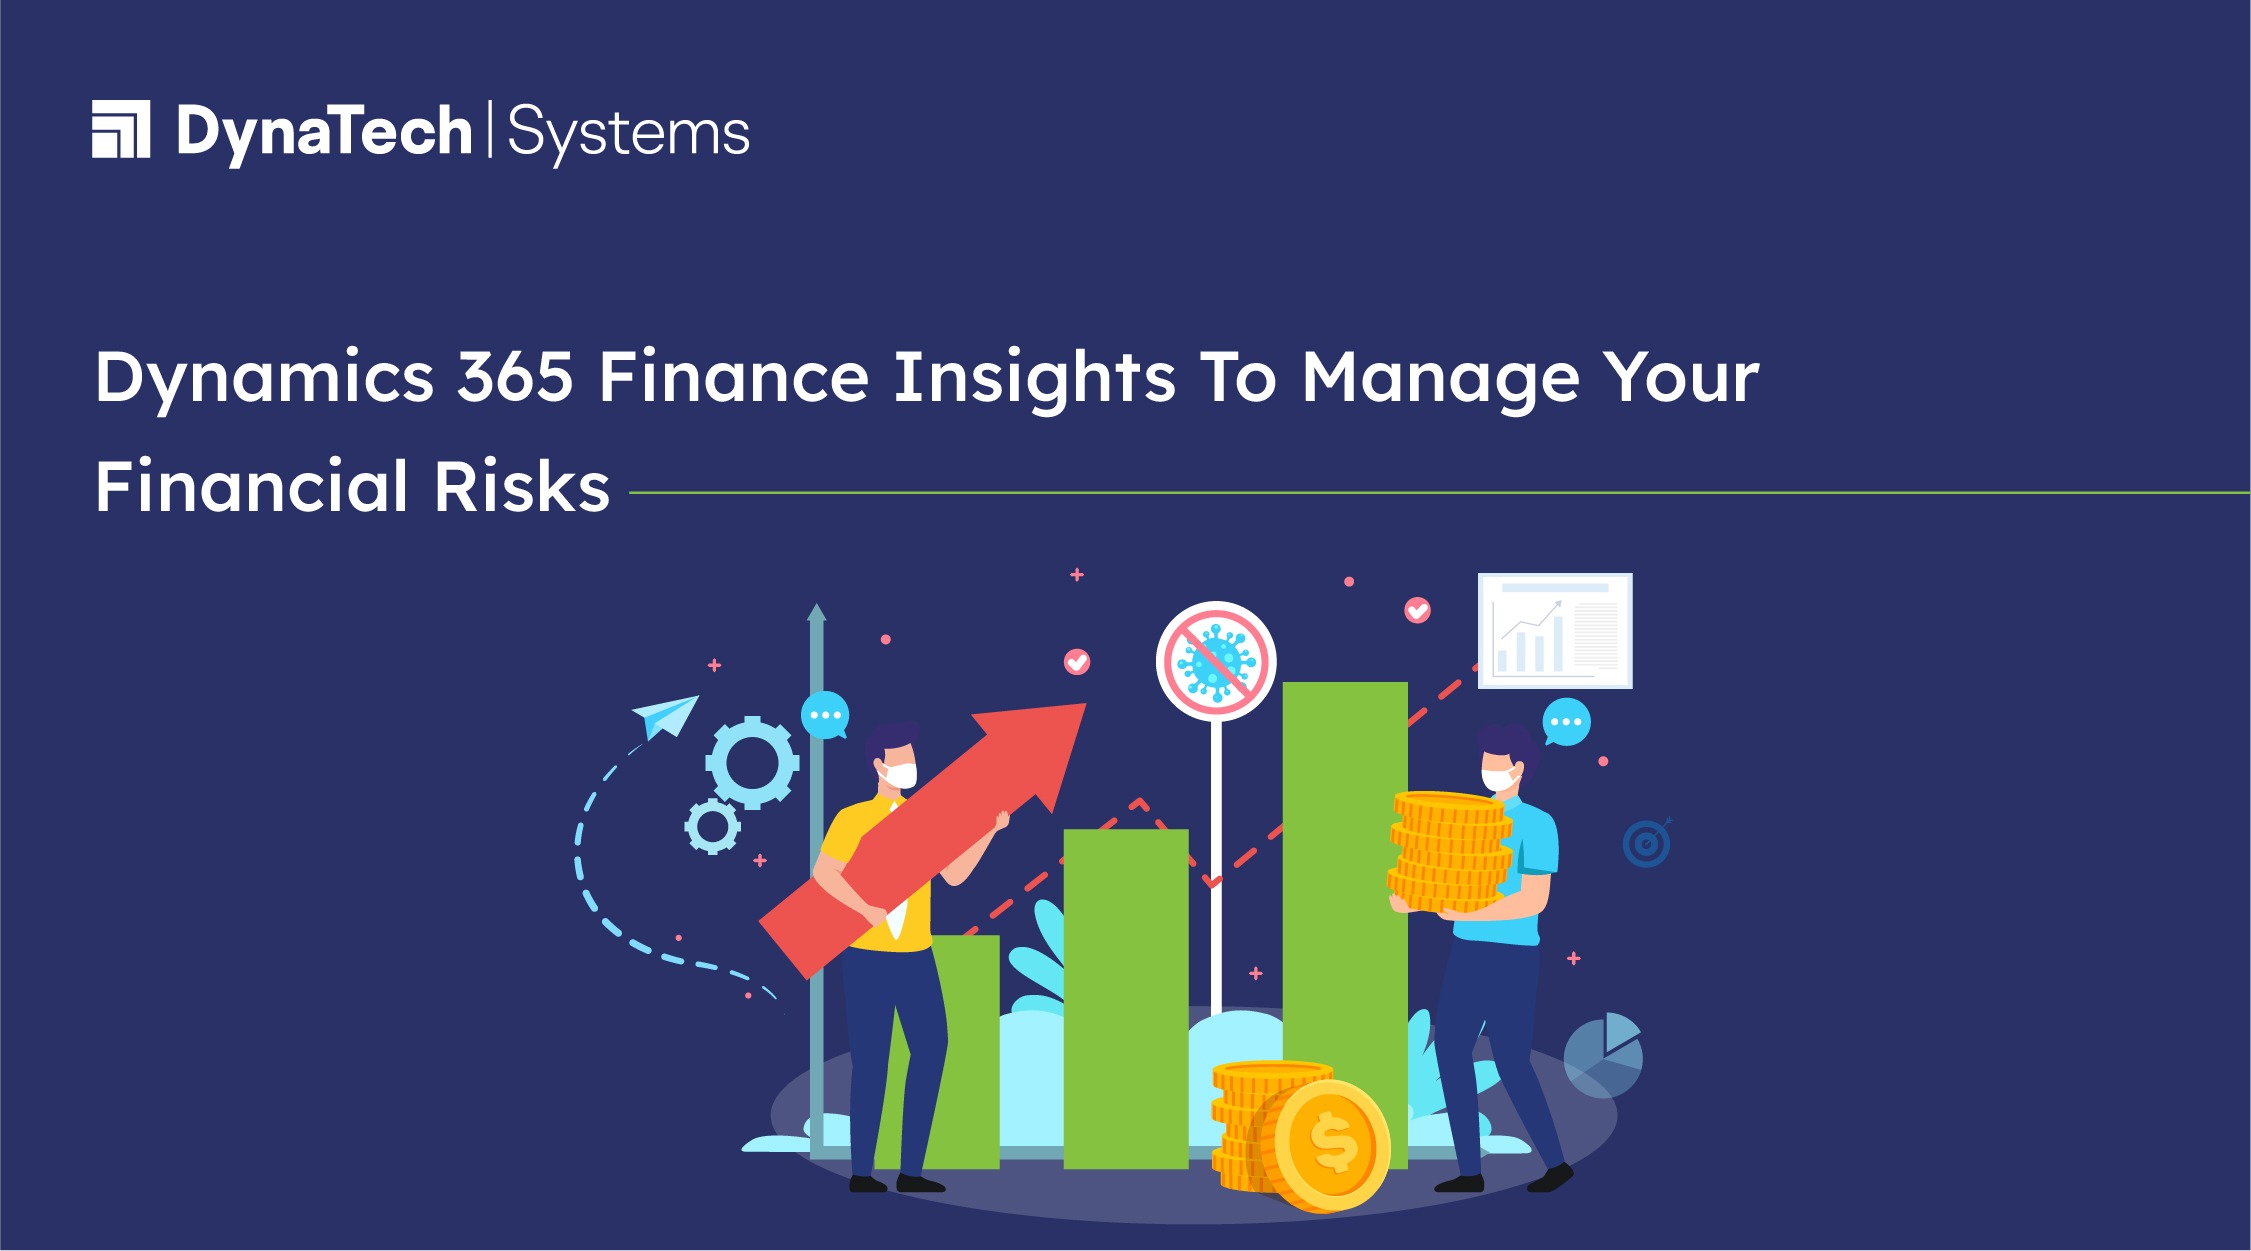 Microsoft Dynamics 365 Finance Insights to Manage Your Financial Risks